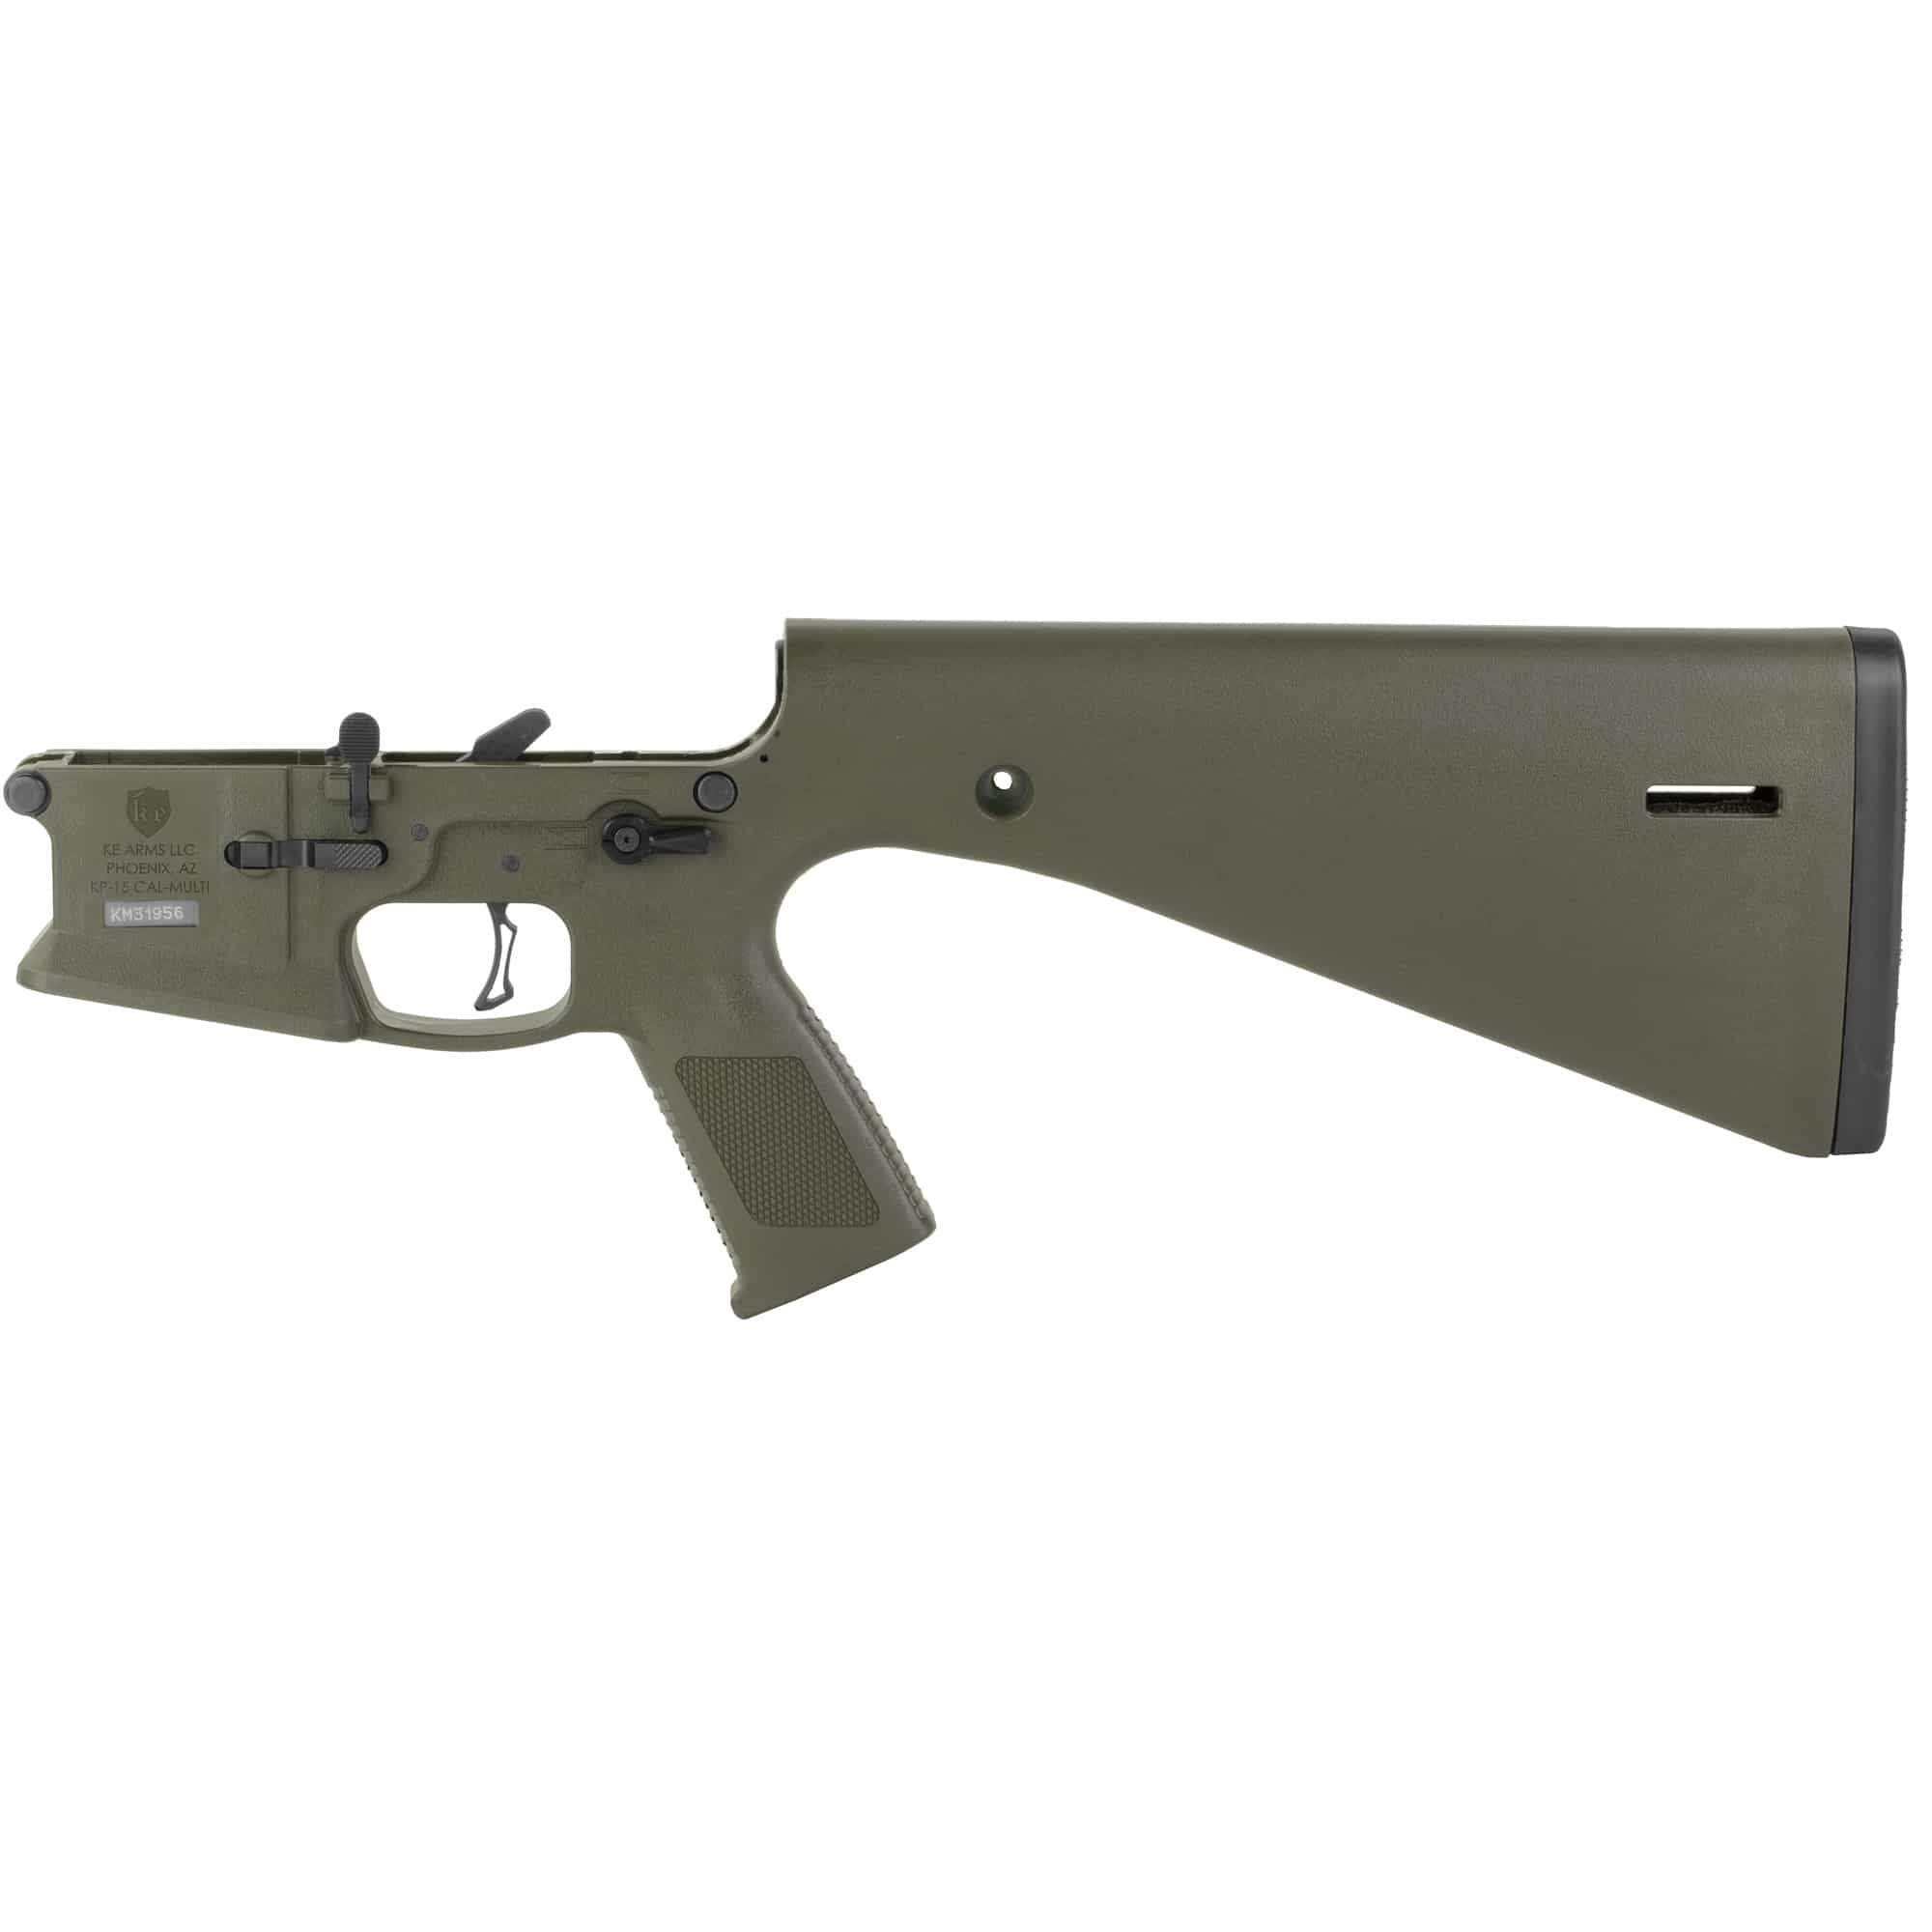 KE Arms KP-15 Monolithic Polymer Lower Receiver with Rekluse Trigger and Ambi Controls - OD Green - AT3 Tactical